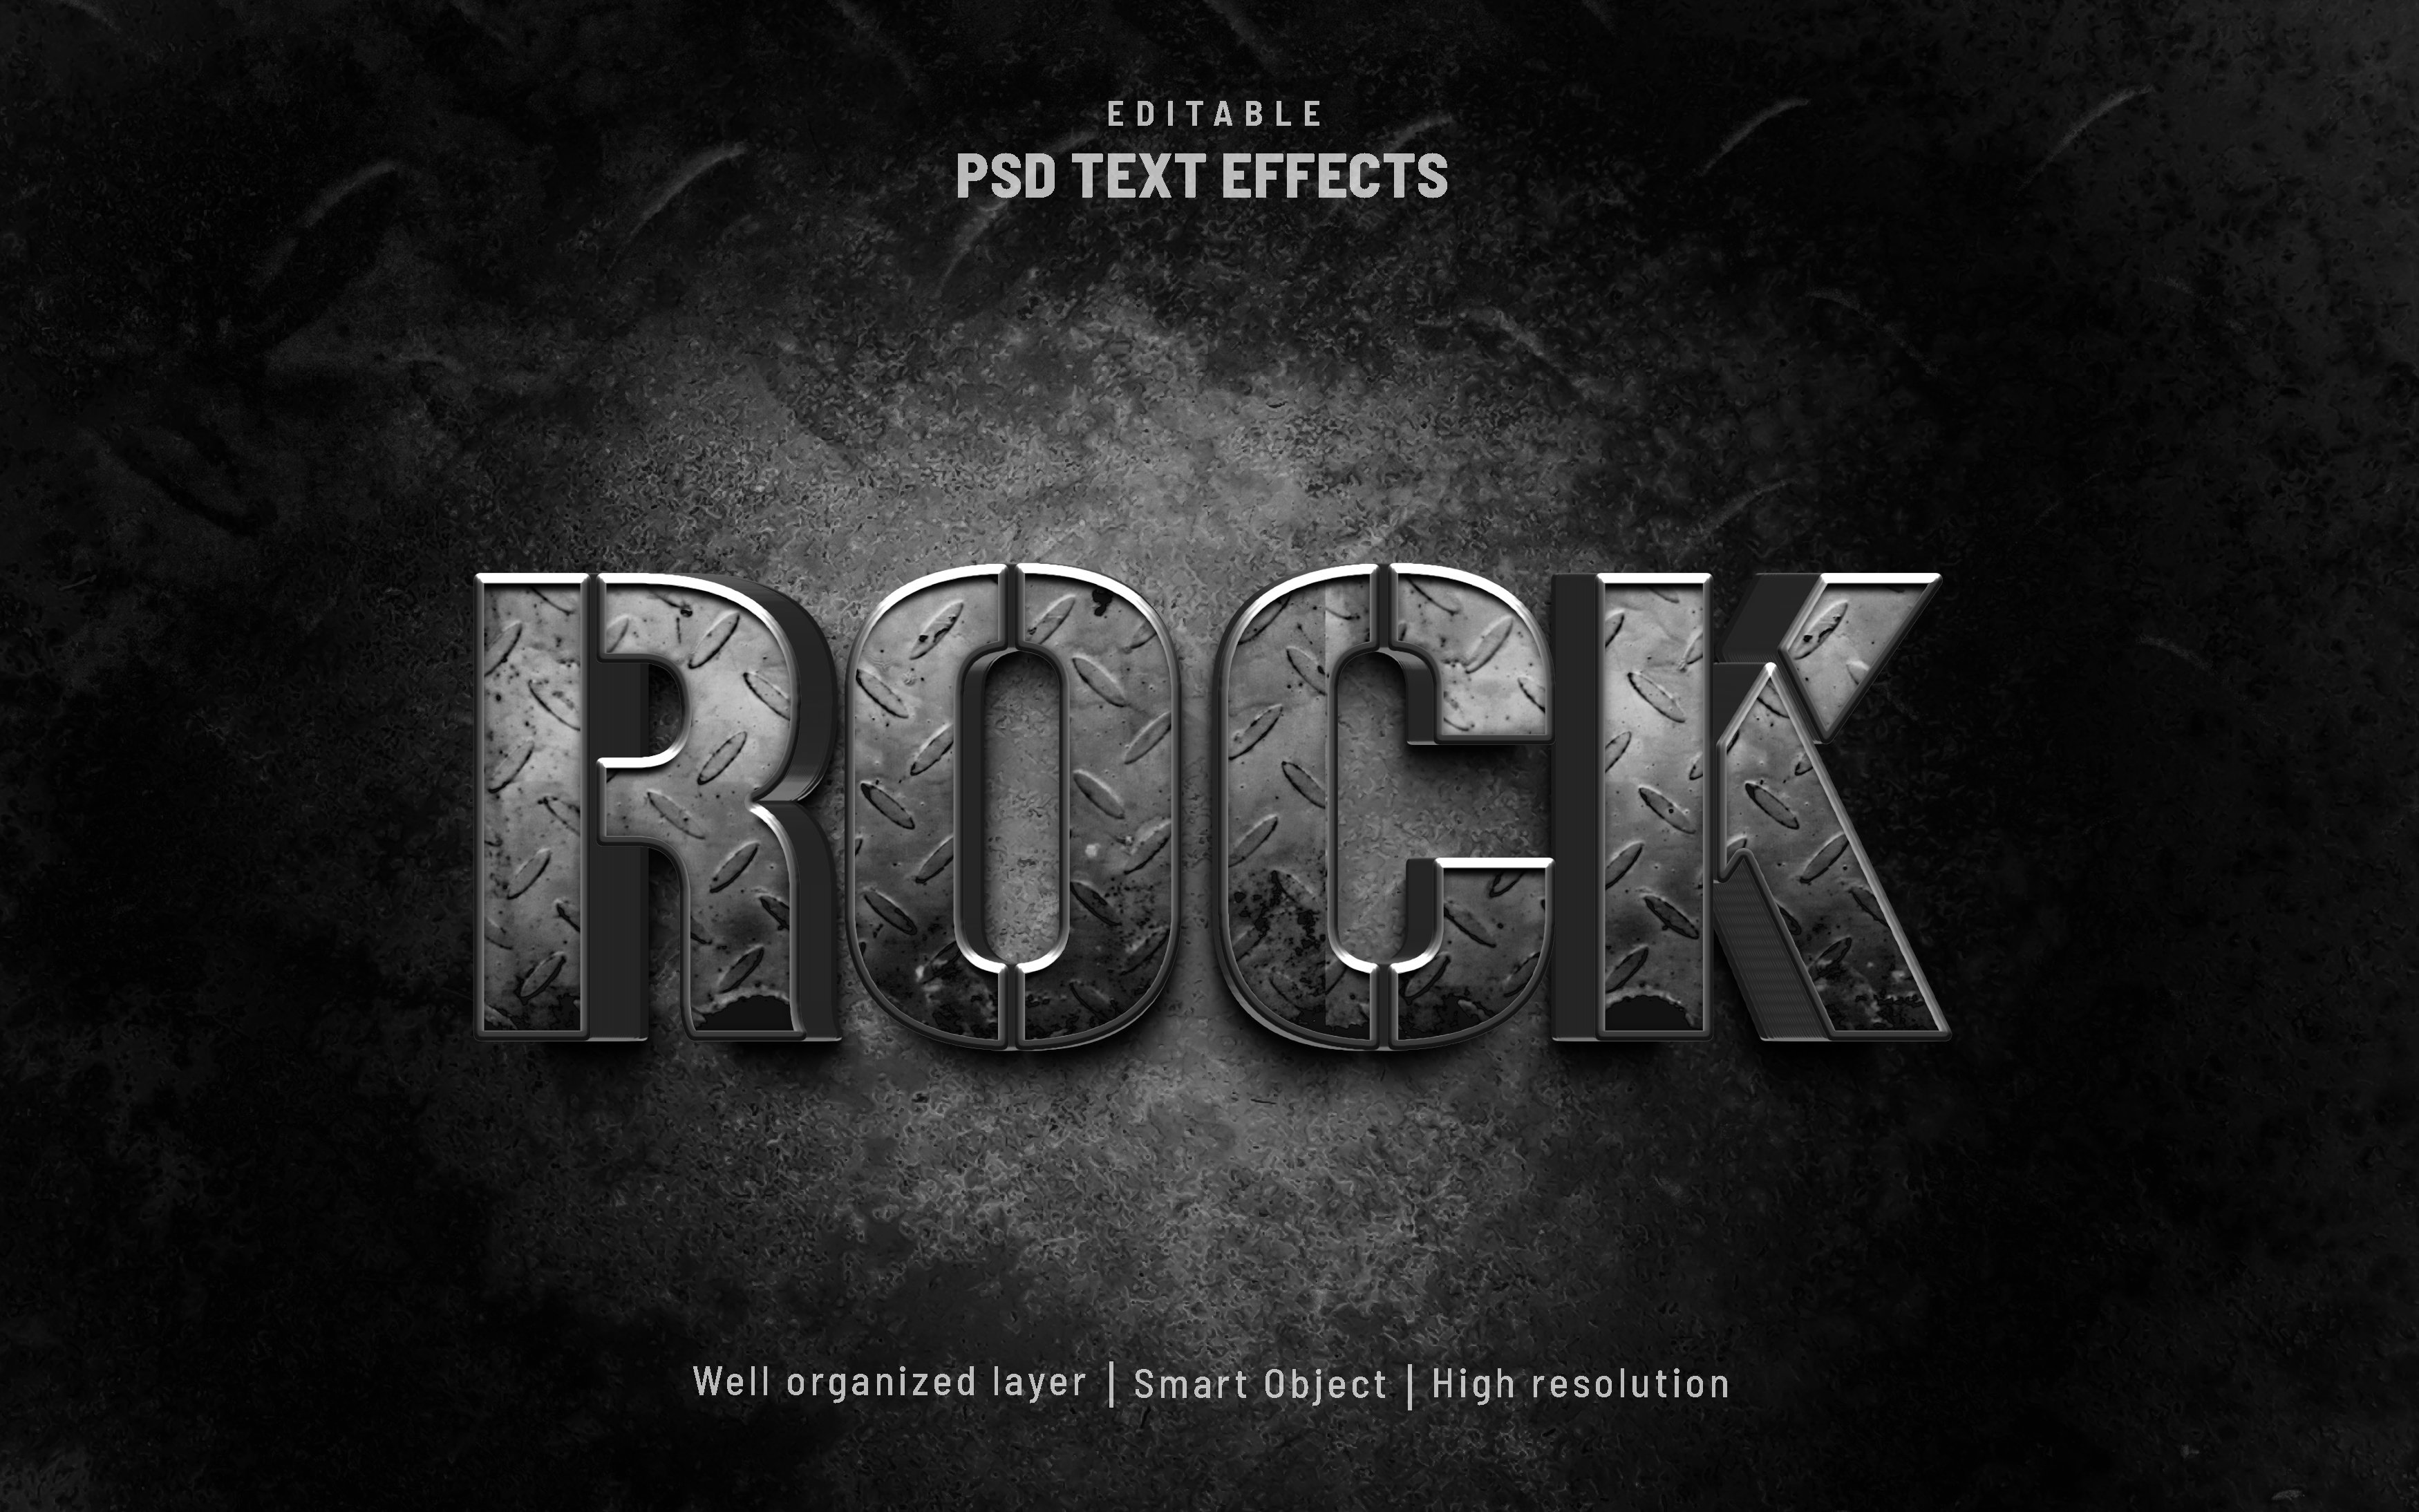 Rock steel movie editable text stylecover image.